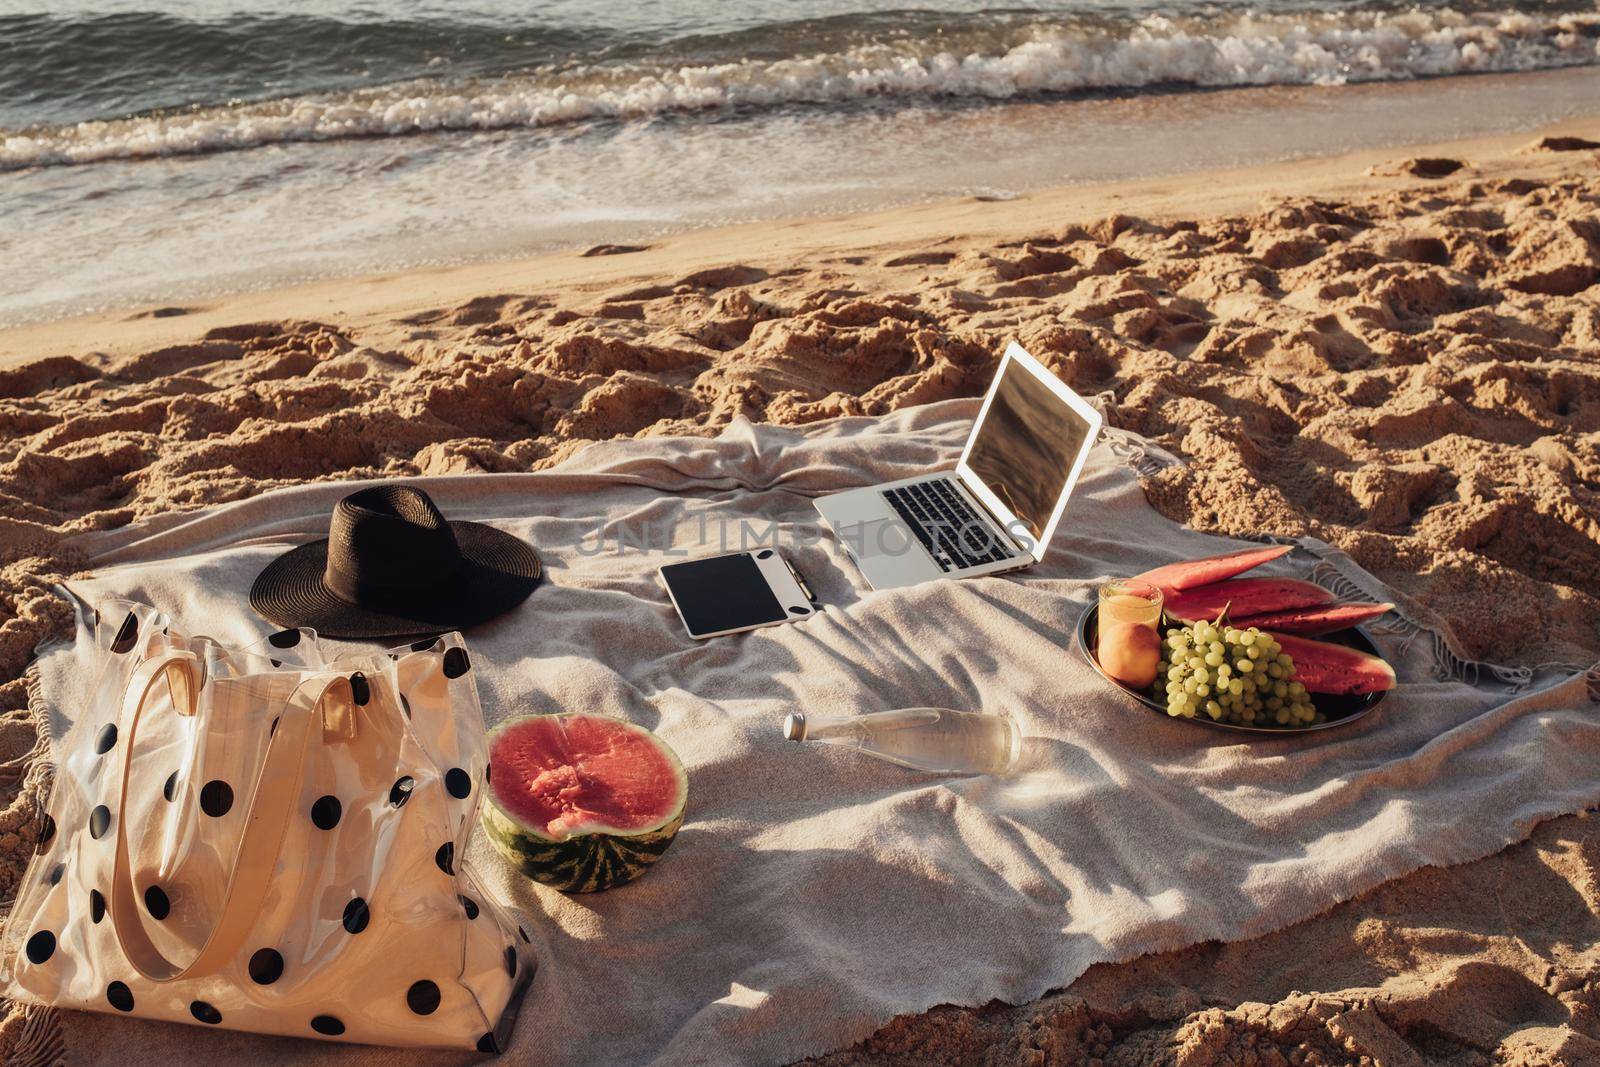 Laptop with Tablet and Fruits Lying on Plaid on Sandy Beach, Picnic Set by the Sea by Romvy